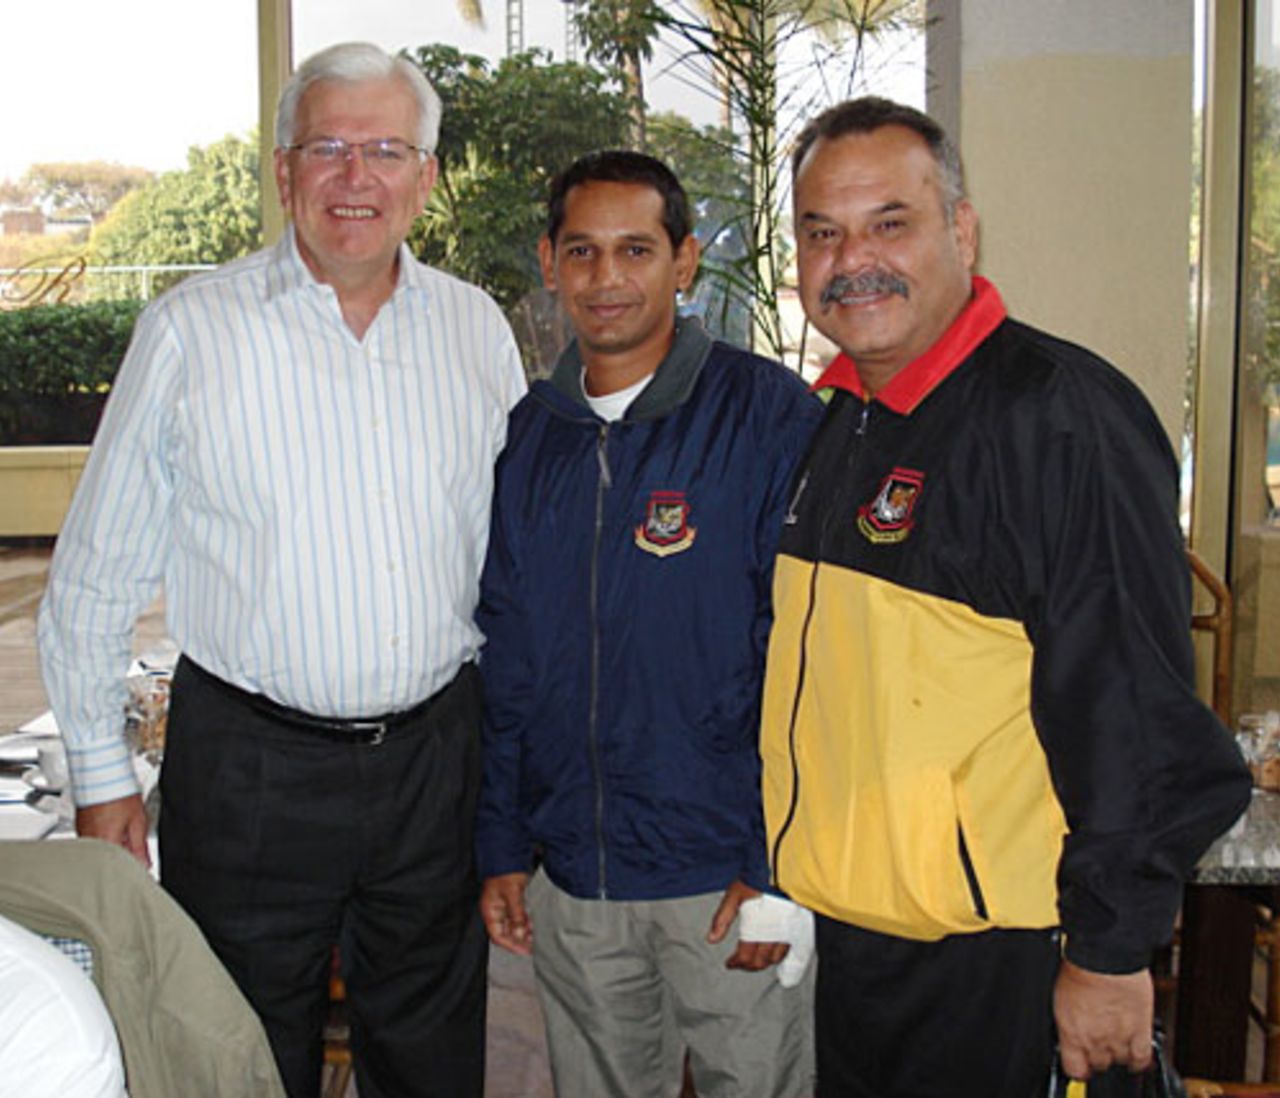 Bangladesh captain Habibul Bashar and coach Dav Whatmore with ICC chief executive Malcolm Speed during breakfast at the Rainbow Towers Hotel, August 1, 2006